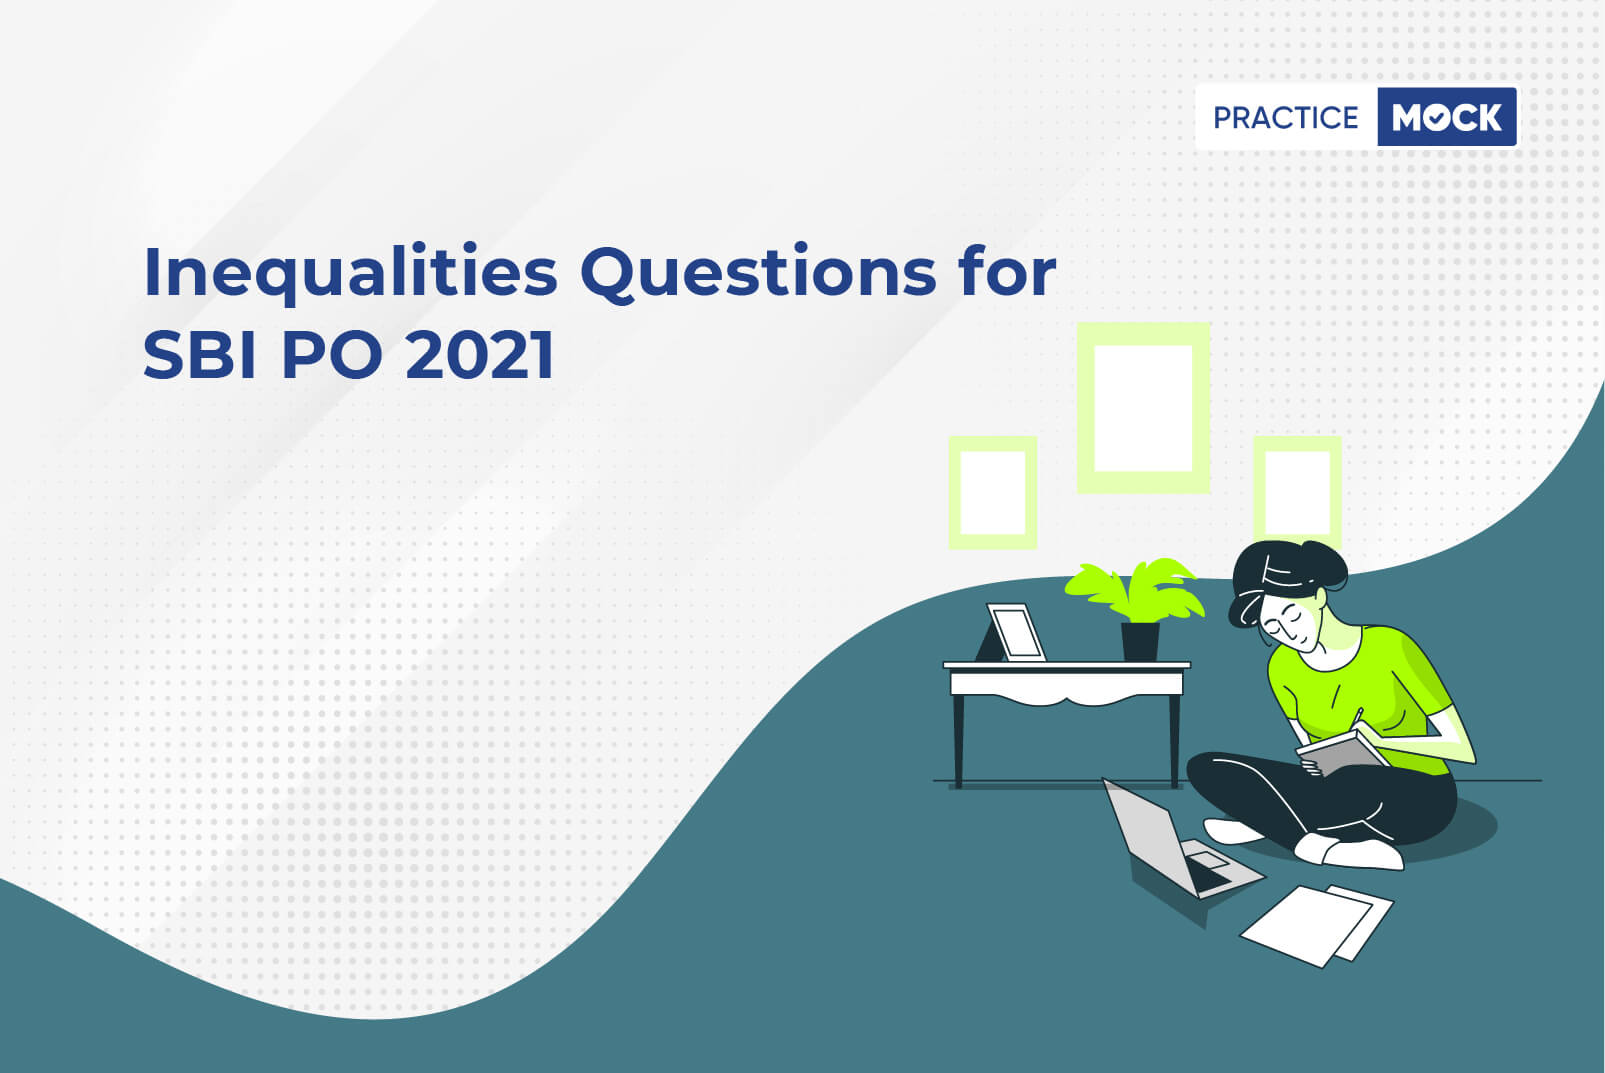 Inequalities questions for SBI PO